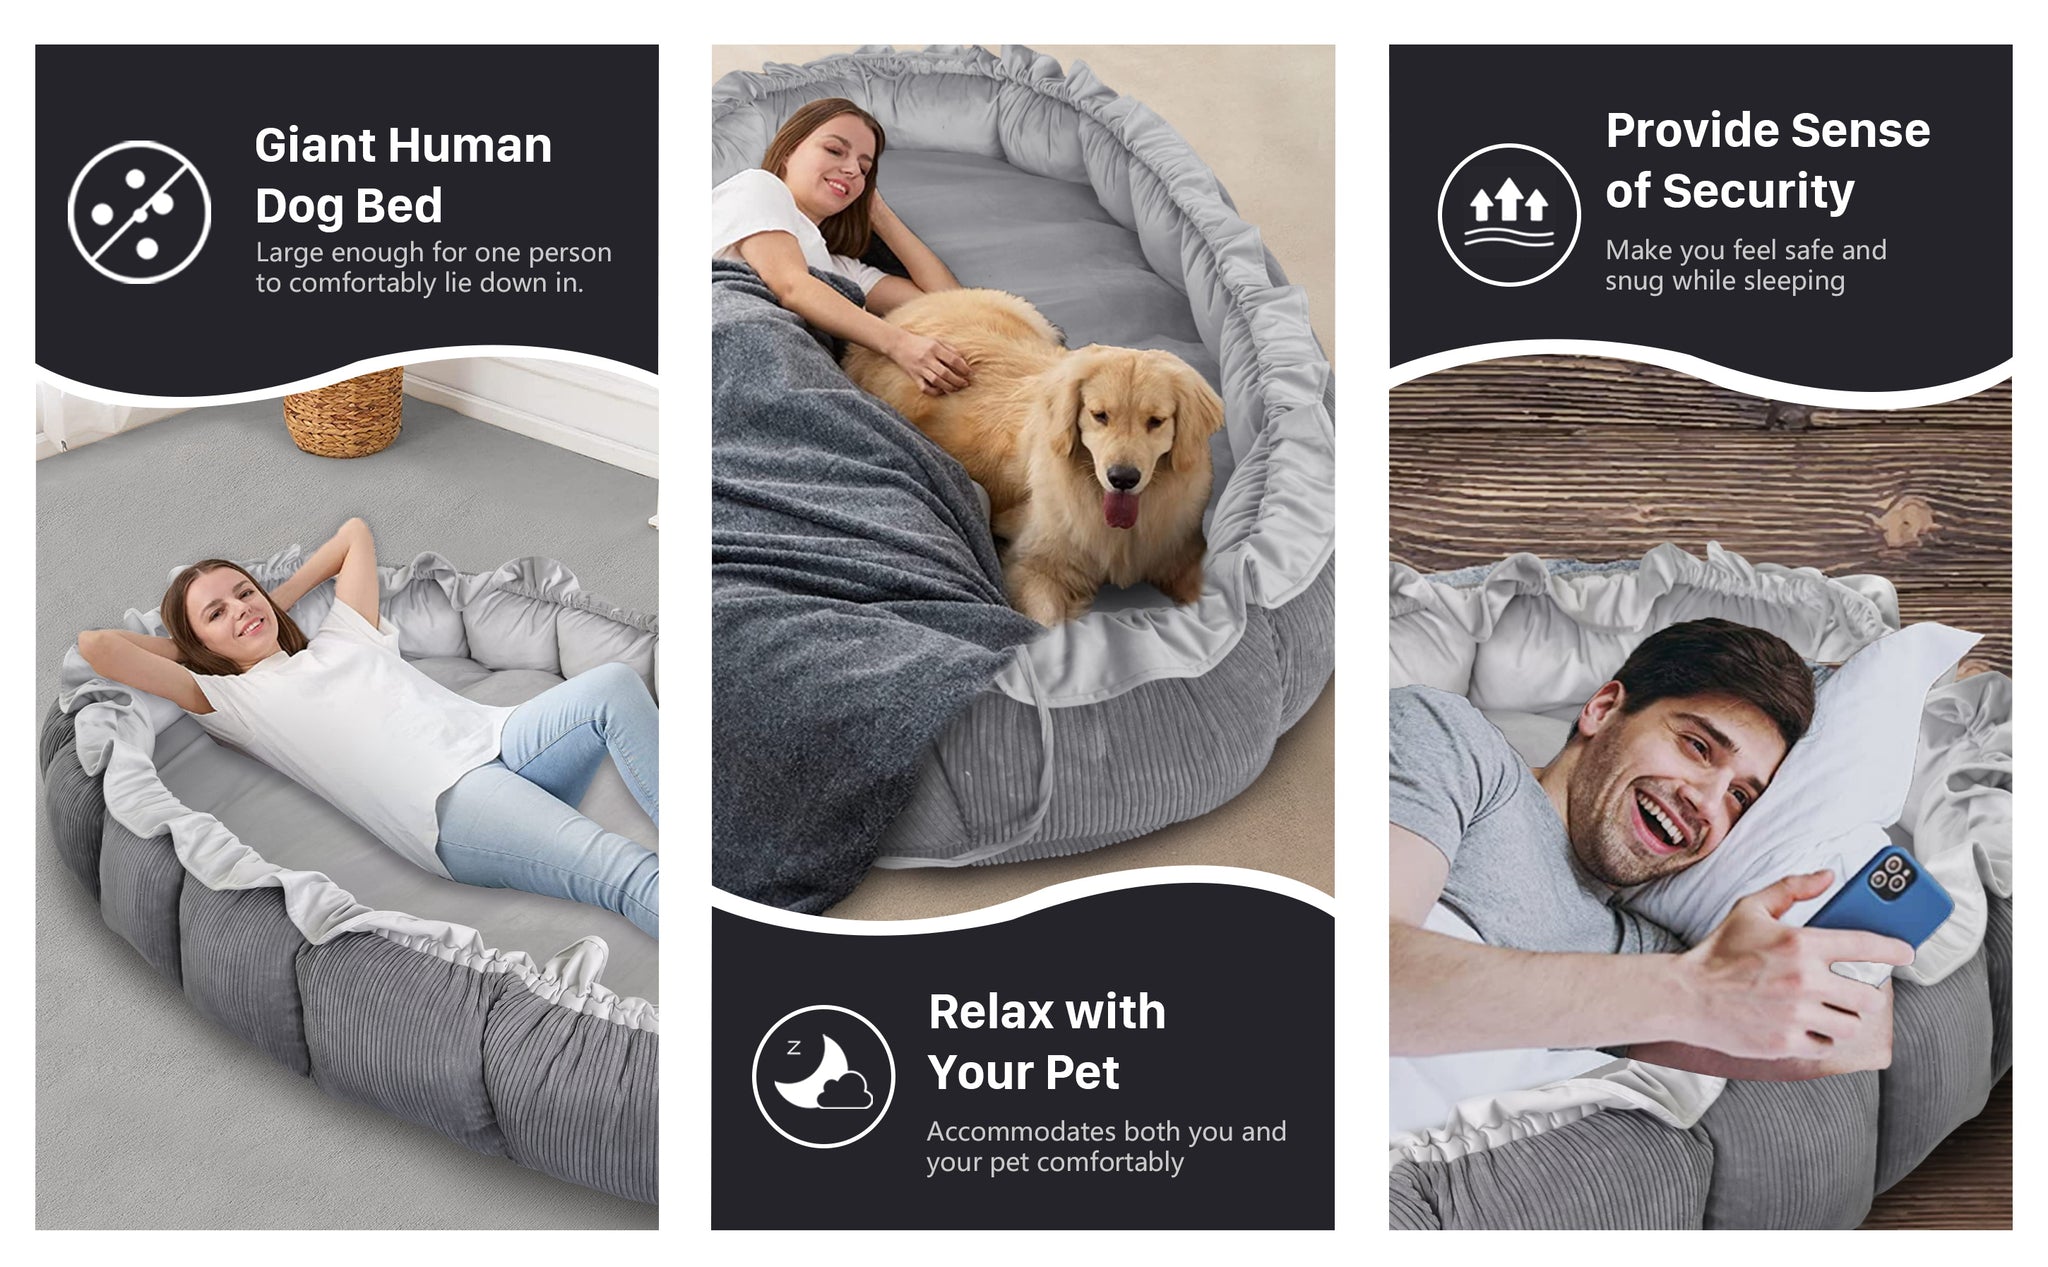 The Humanoid Dog Bed Futon is the perfect companion for your furry friend. It's up to 4 inches thick, with dimensions of 94 x 65 inches, making it a comfortable spot for even larger breeds. Plus, its kid-friendly design makes it suitable for the whole family.